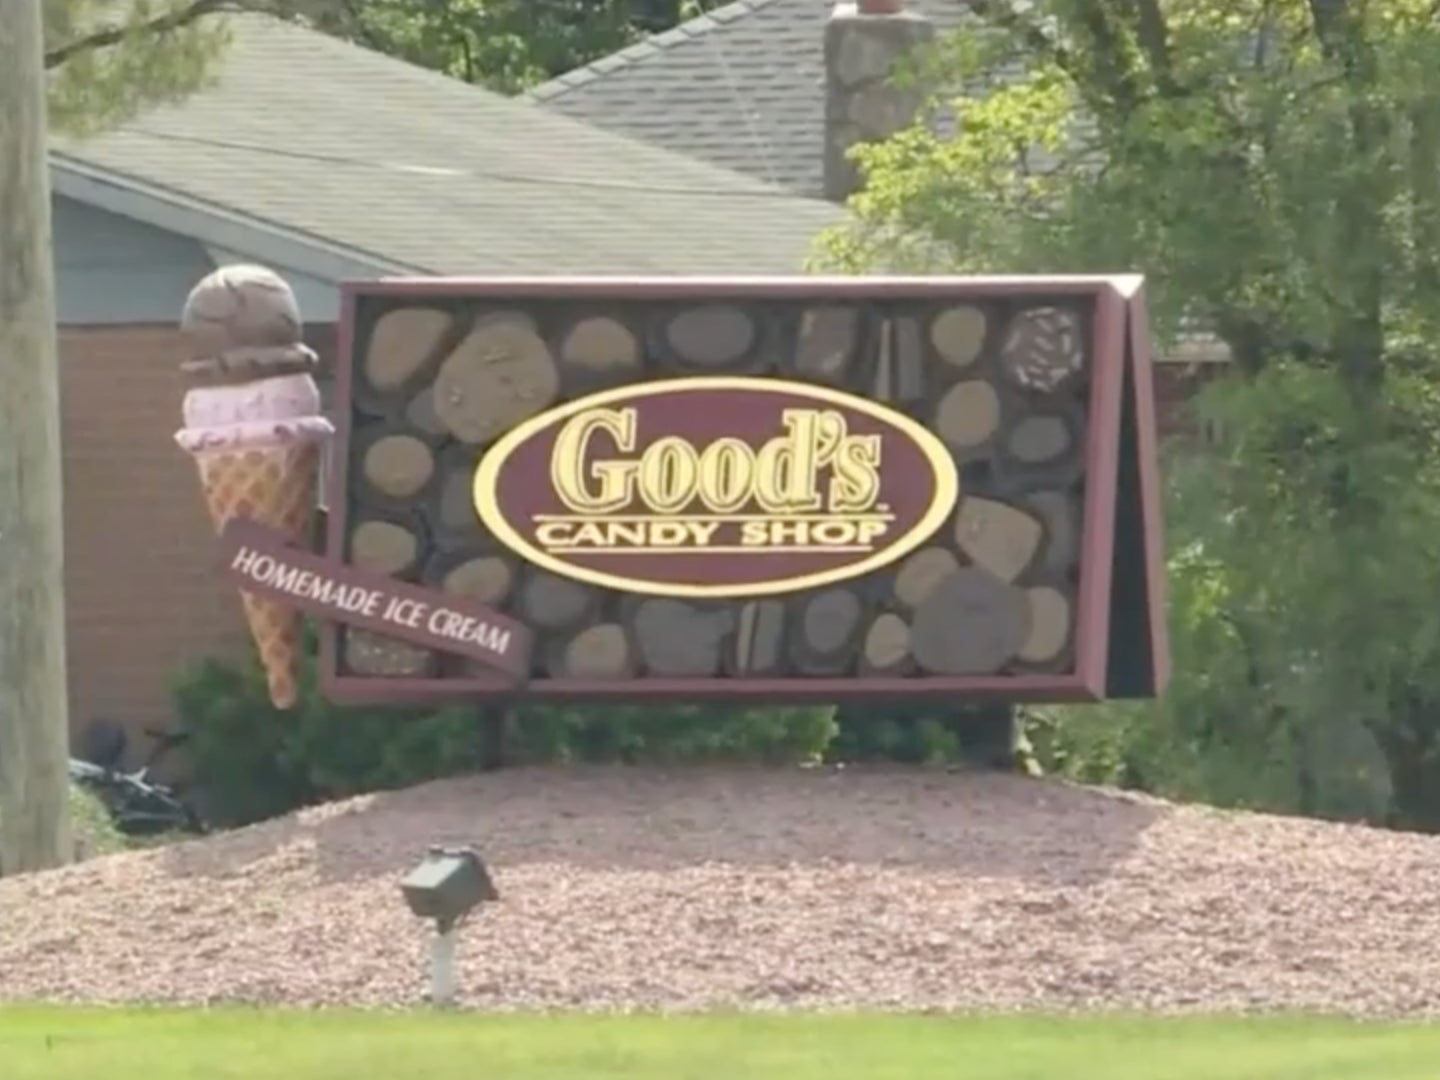 Good’s Candy Shop in Anderson, Indiana came under fire after a job advert many deemed to be sexist.